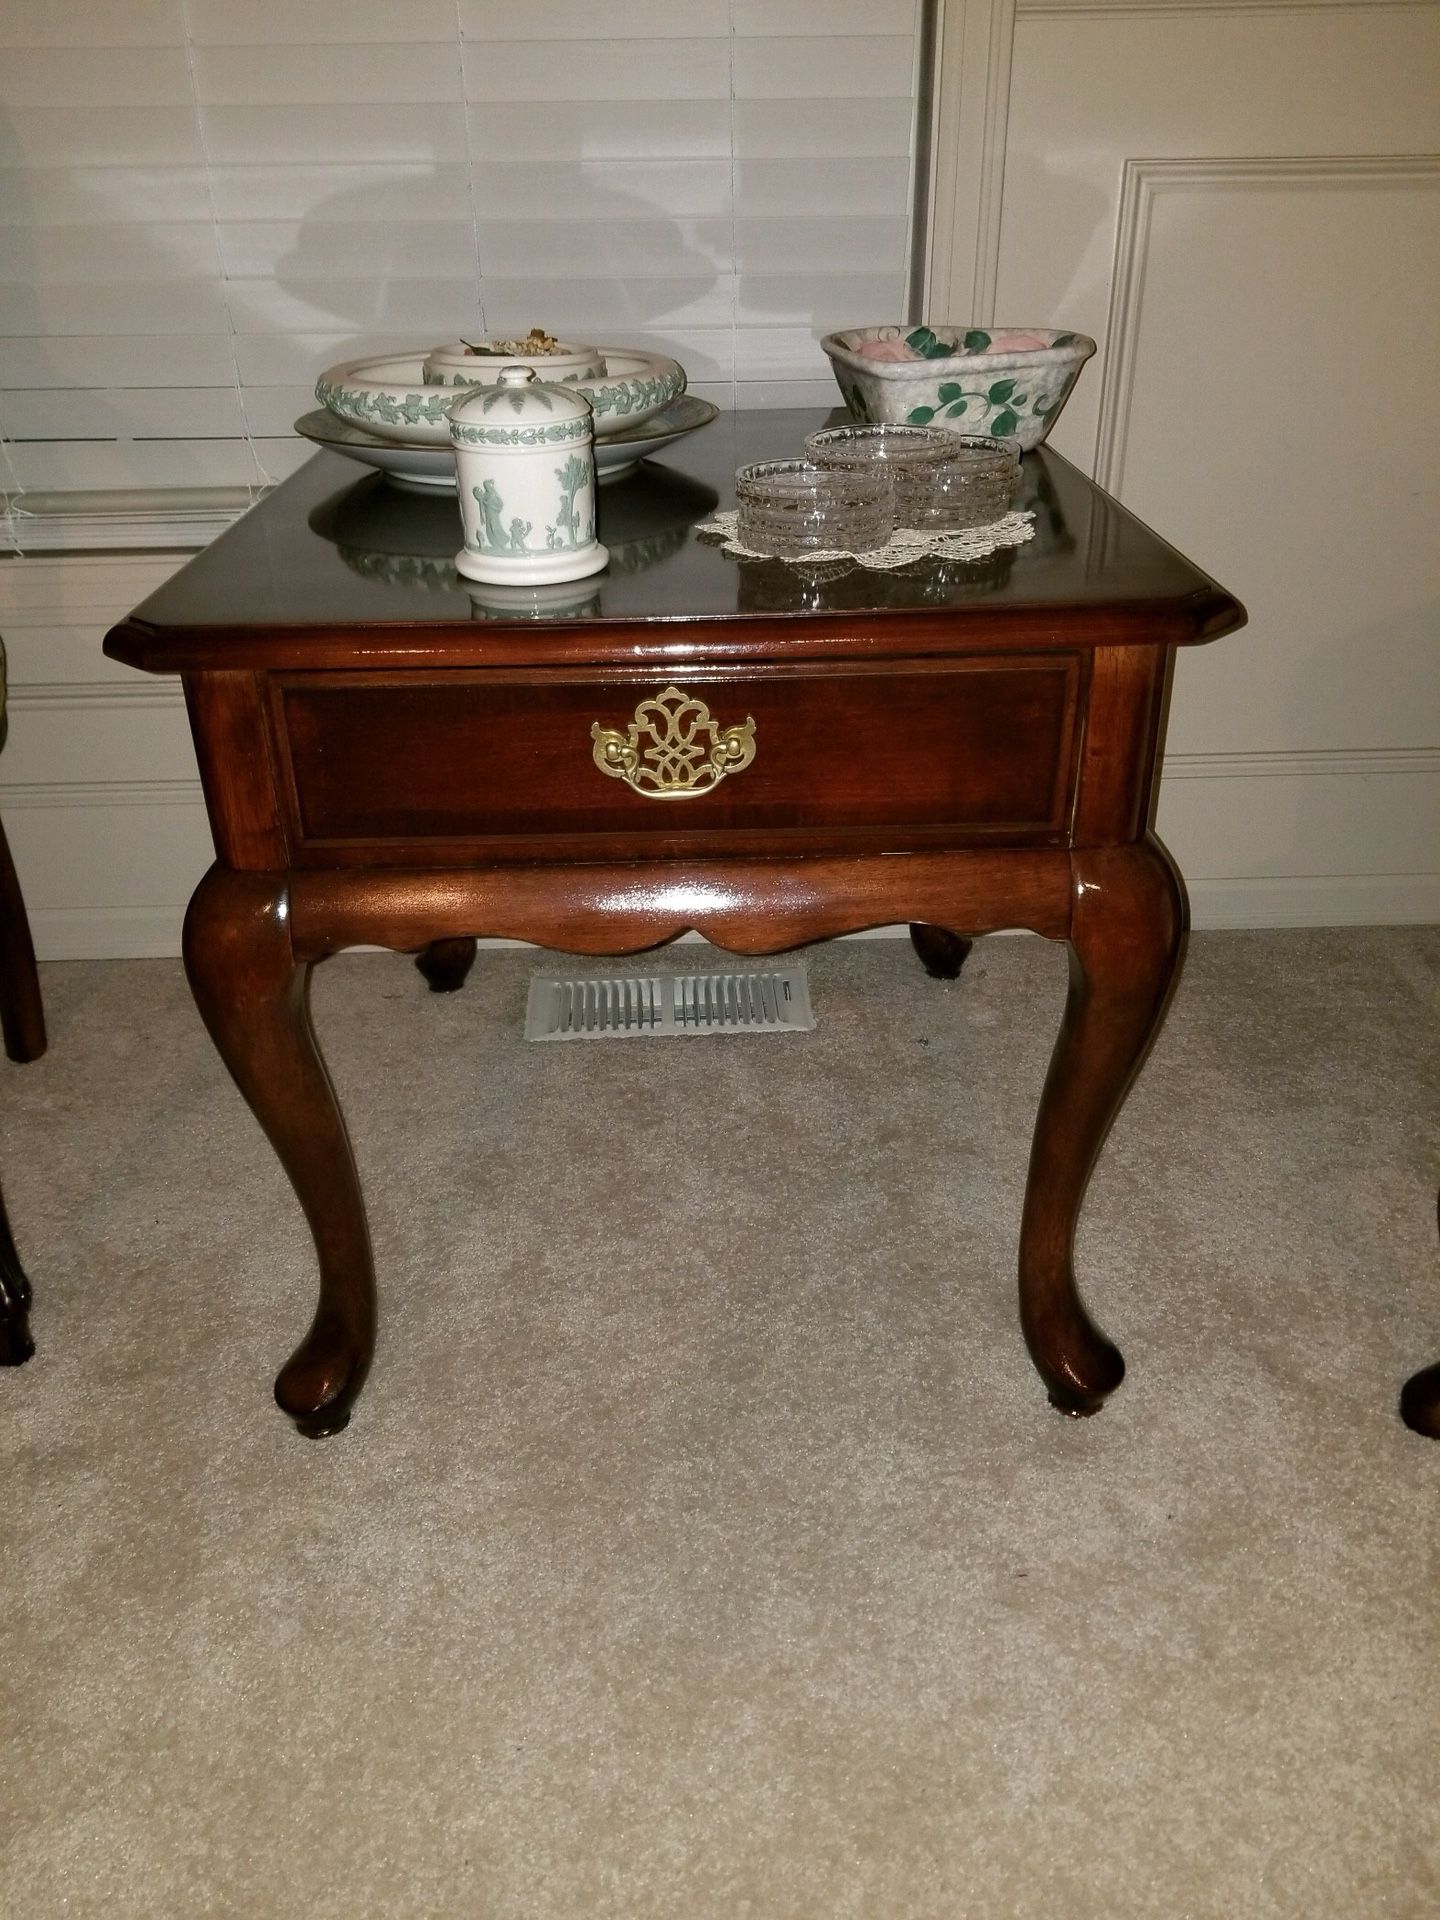 2 tables and 1 coffee table for sale